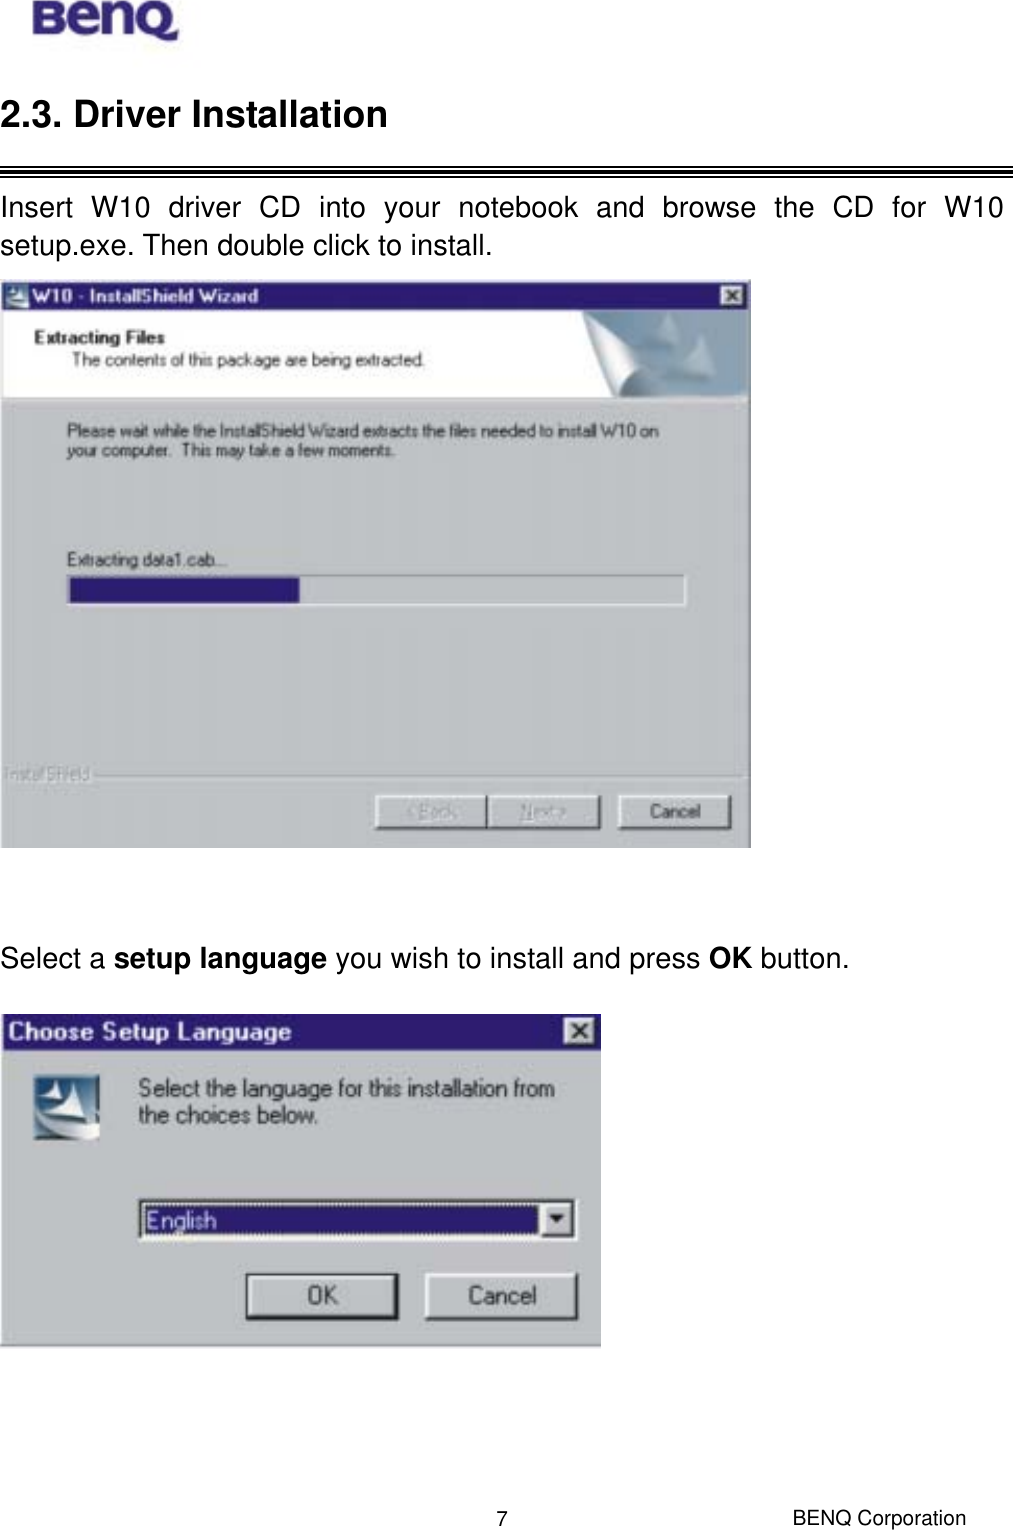  BENQ Corporation 72.3. Driver Installation  Insert W10 driver CD into your notebook and browse the CD for W10 setup.exe. Then double click to install.    Select a setup language you wish to install and press OK button.       